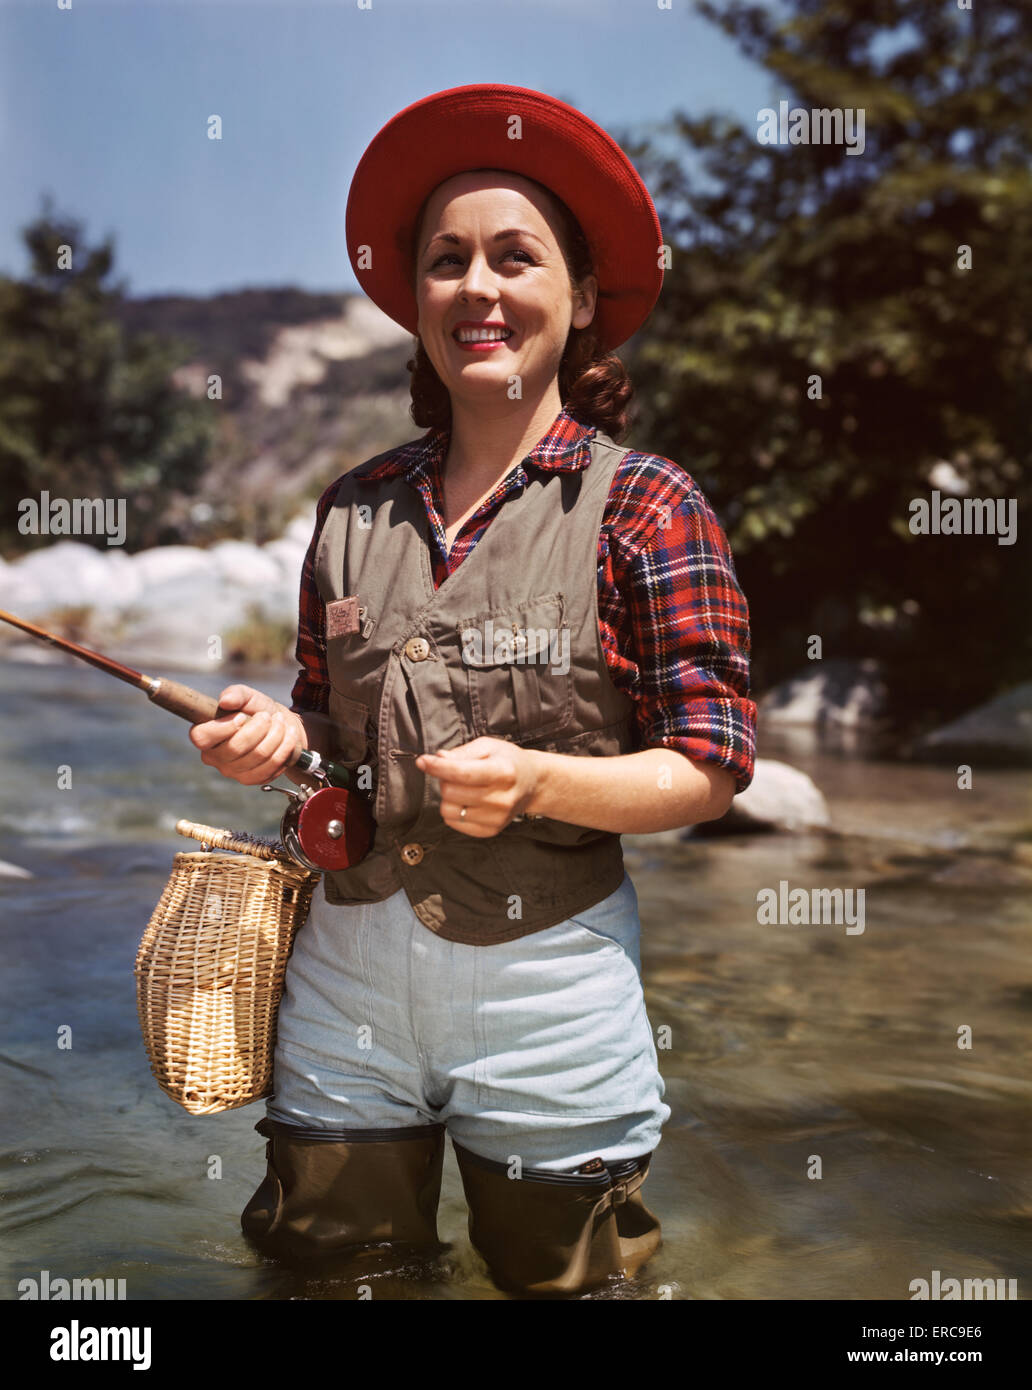 1940s 1950s SMILING WOMAN STANDING IN STREAM FLY FISHING WEARING